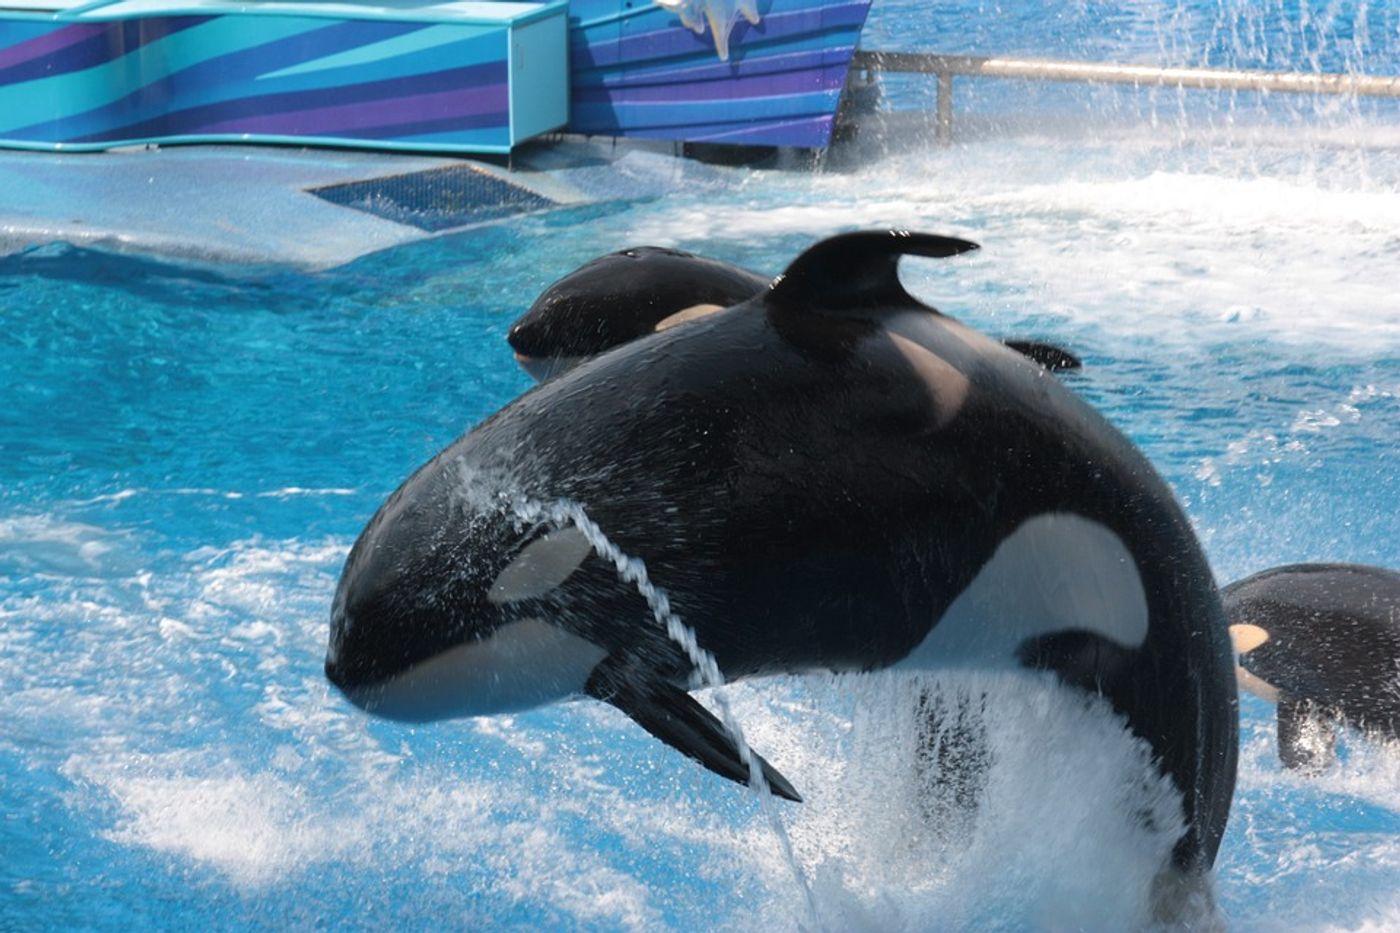 An orca at one of SeaWorld's facilities. (Kayla not pictured)